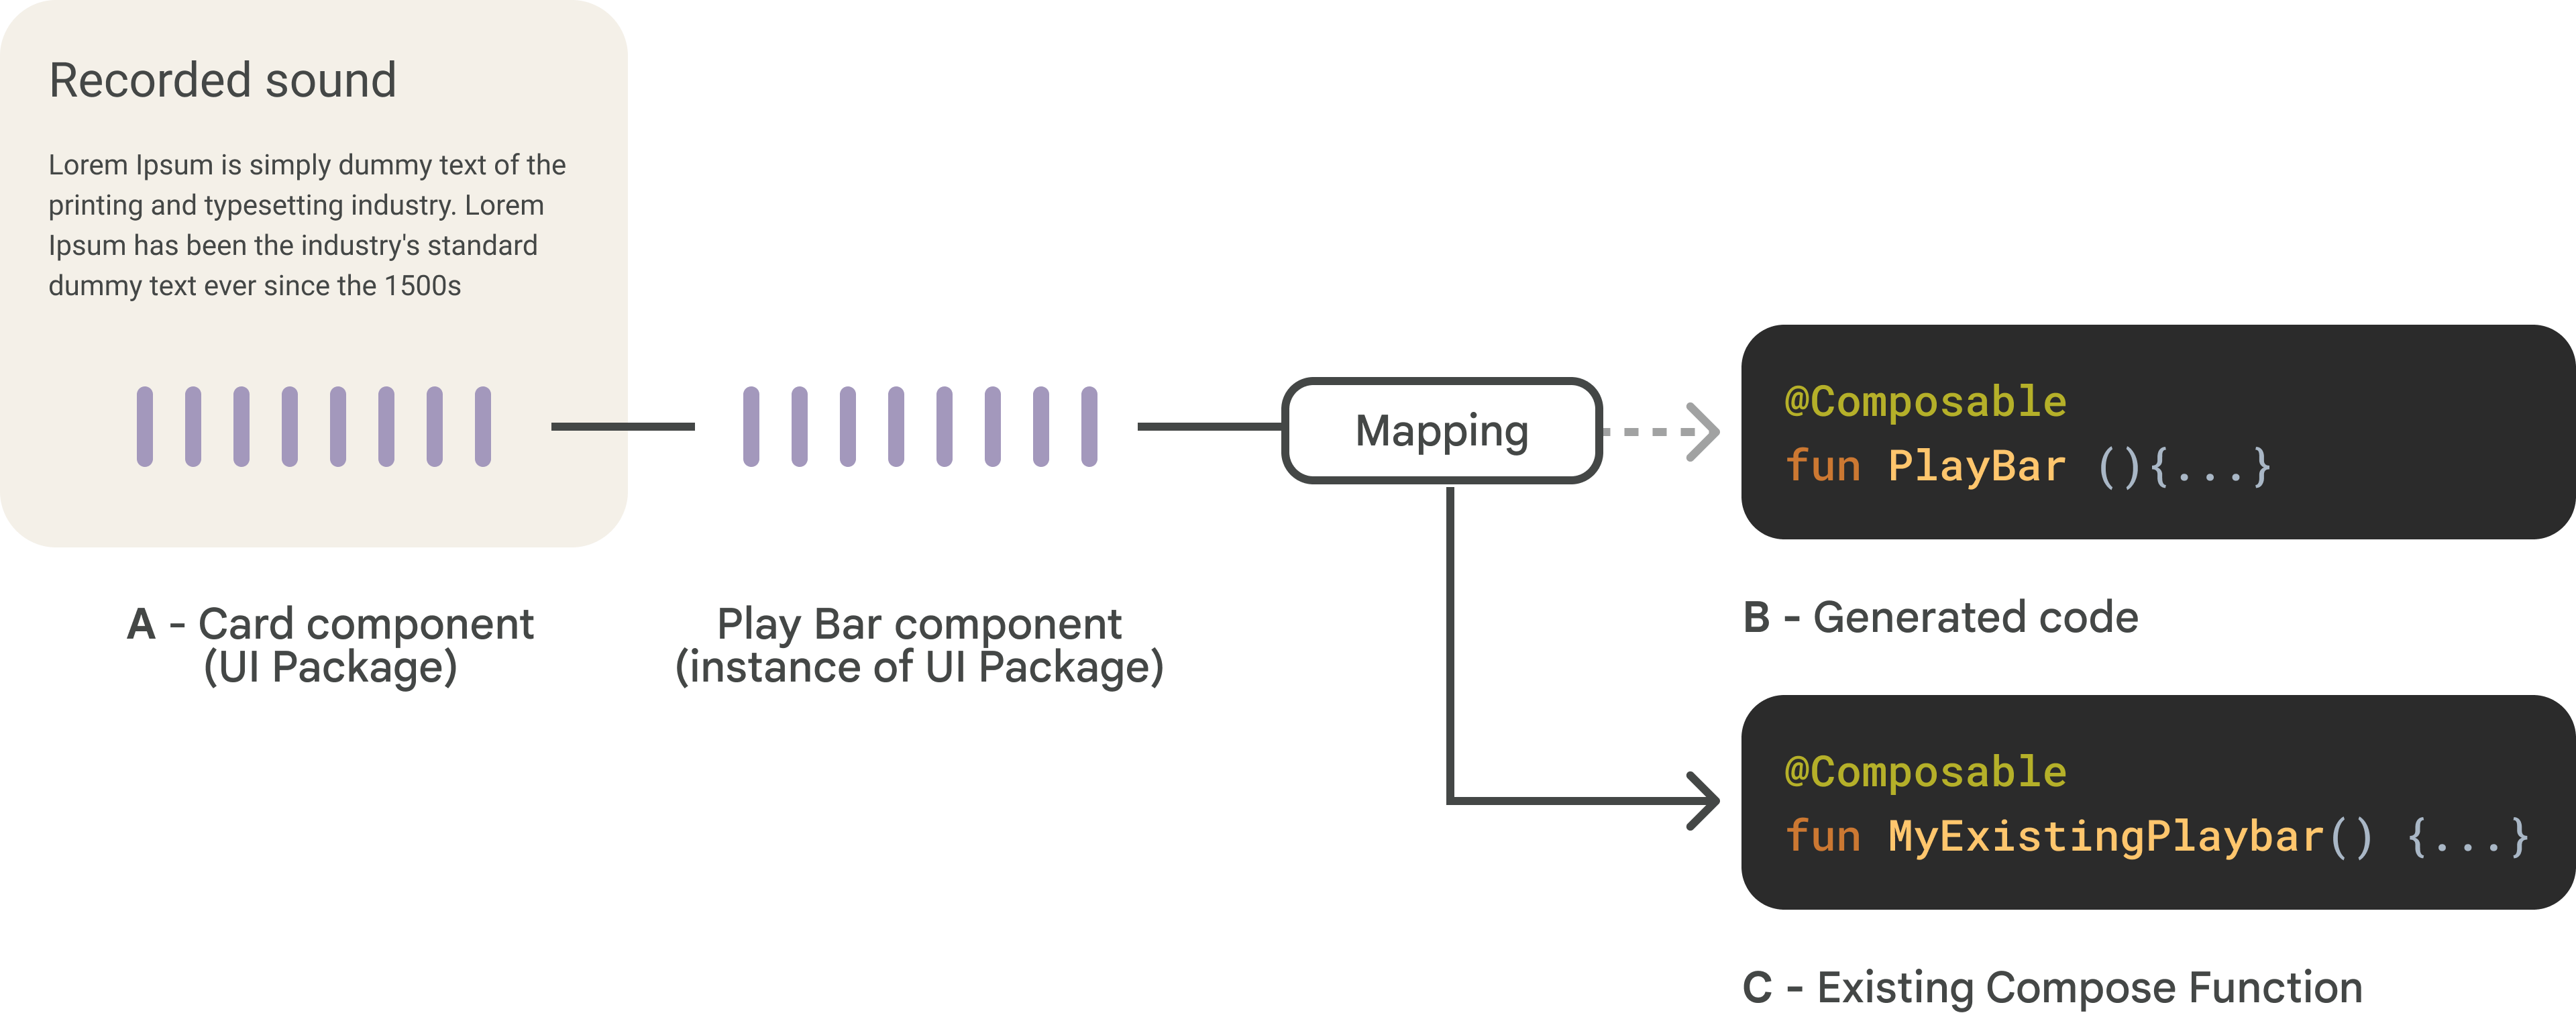 Mapped component overview diagram